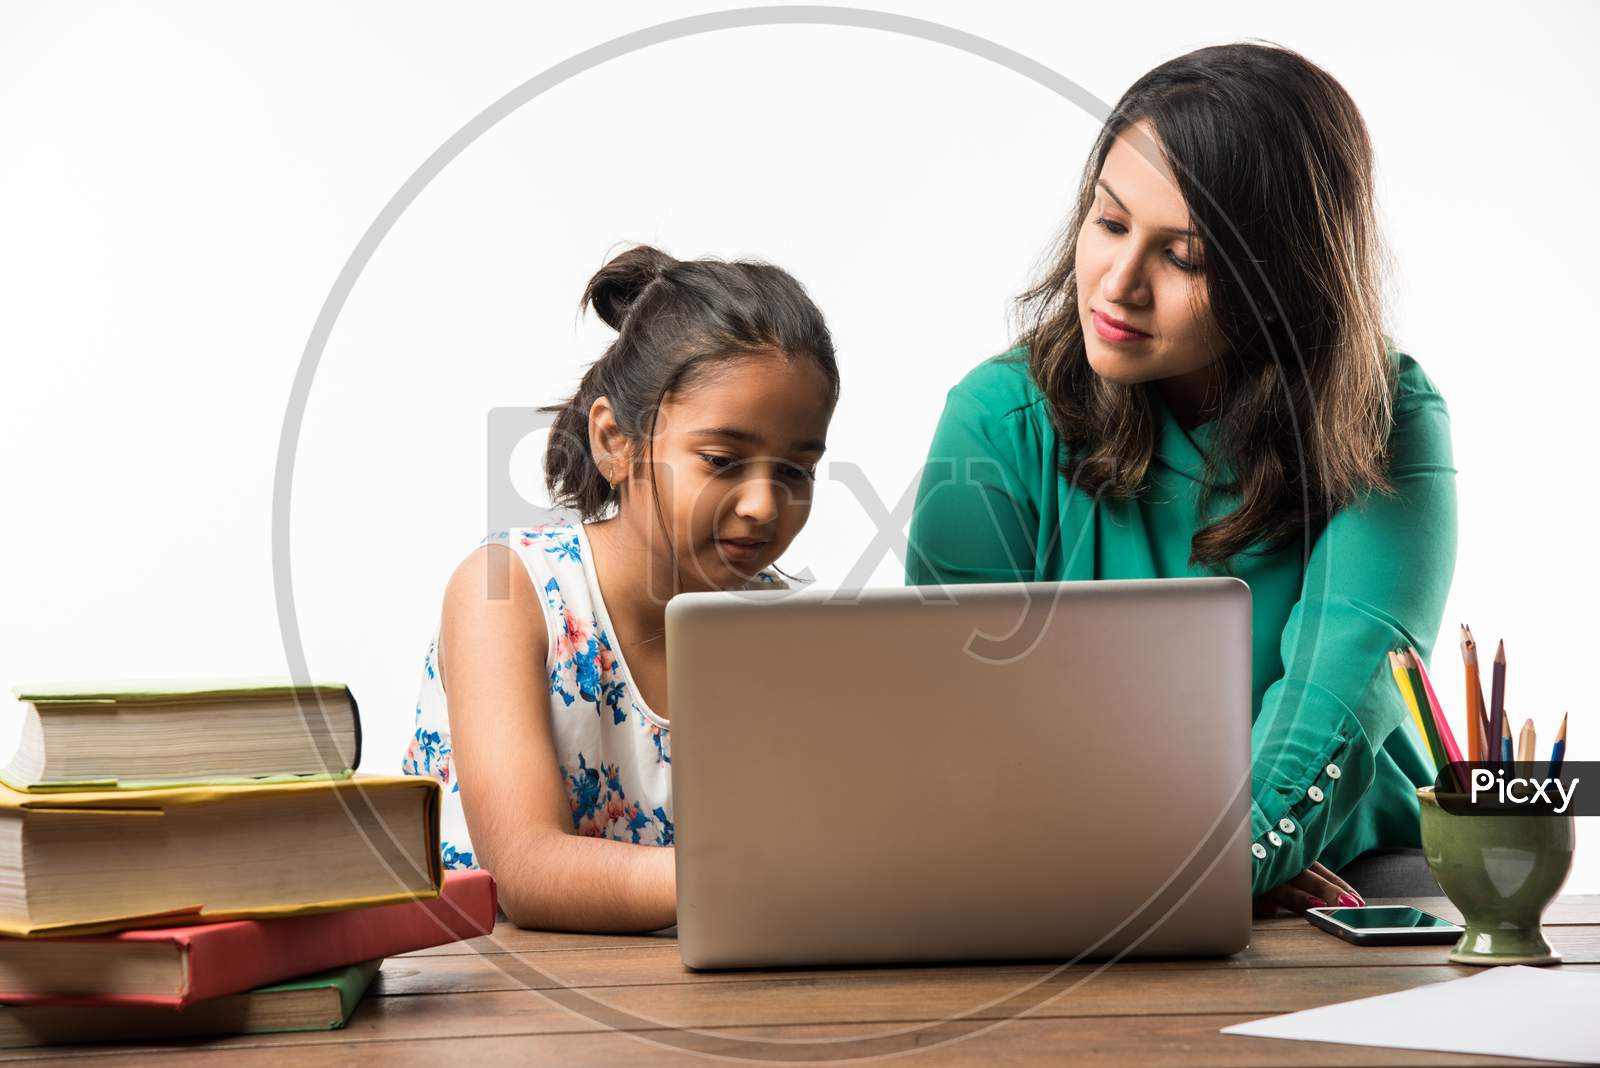 Indian girl studying with mother at study table with laptop and books